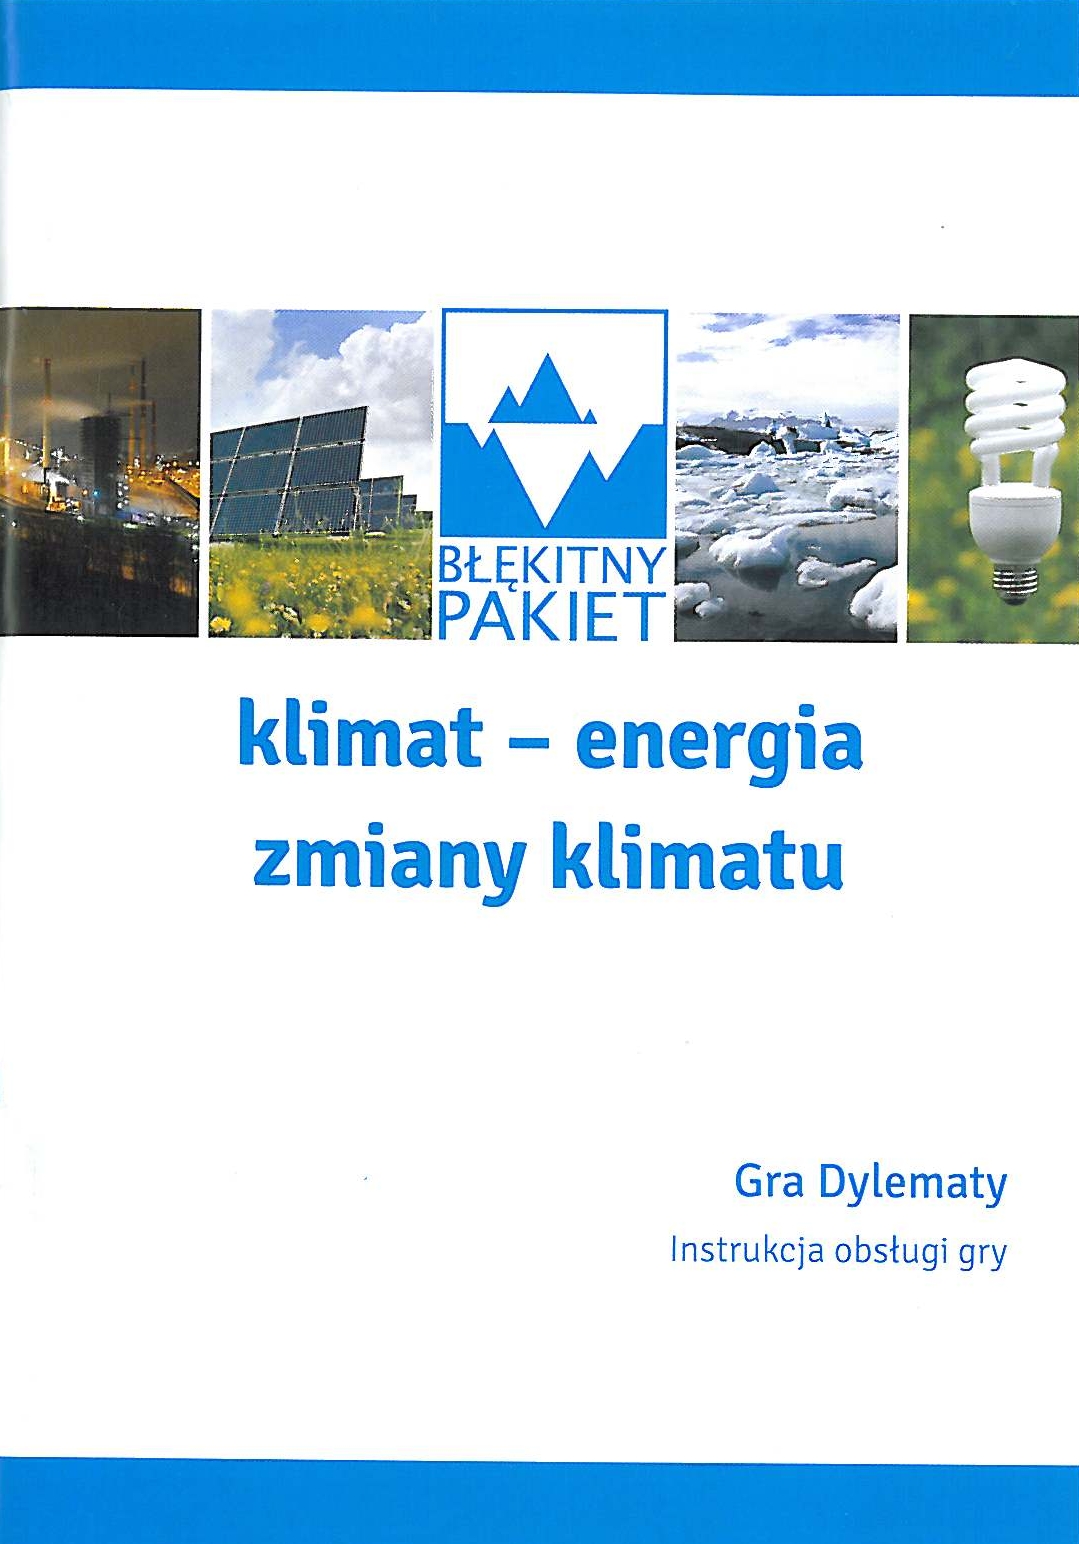 Blue pack. Climate – energy – climate changes